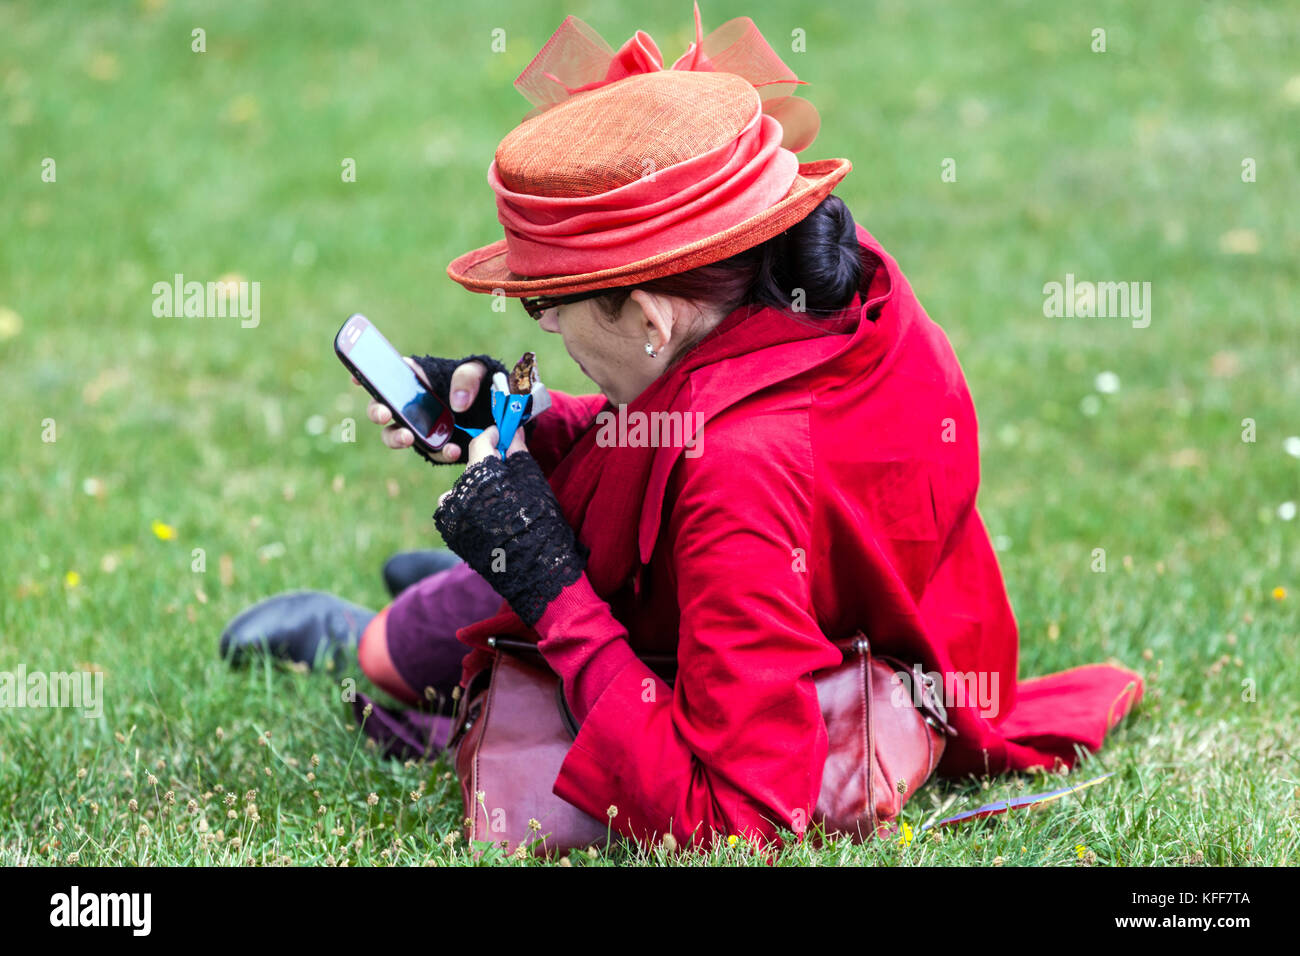 The woman dressed in red, uses her mobile phone, rear view Stock Photo